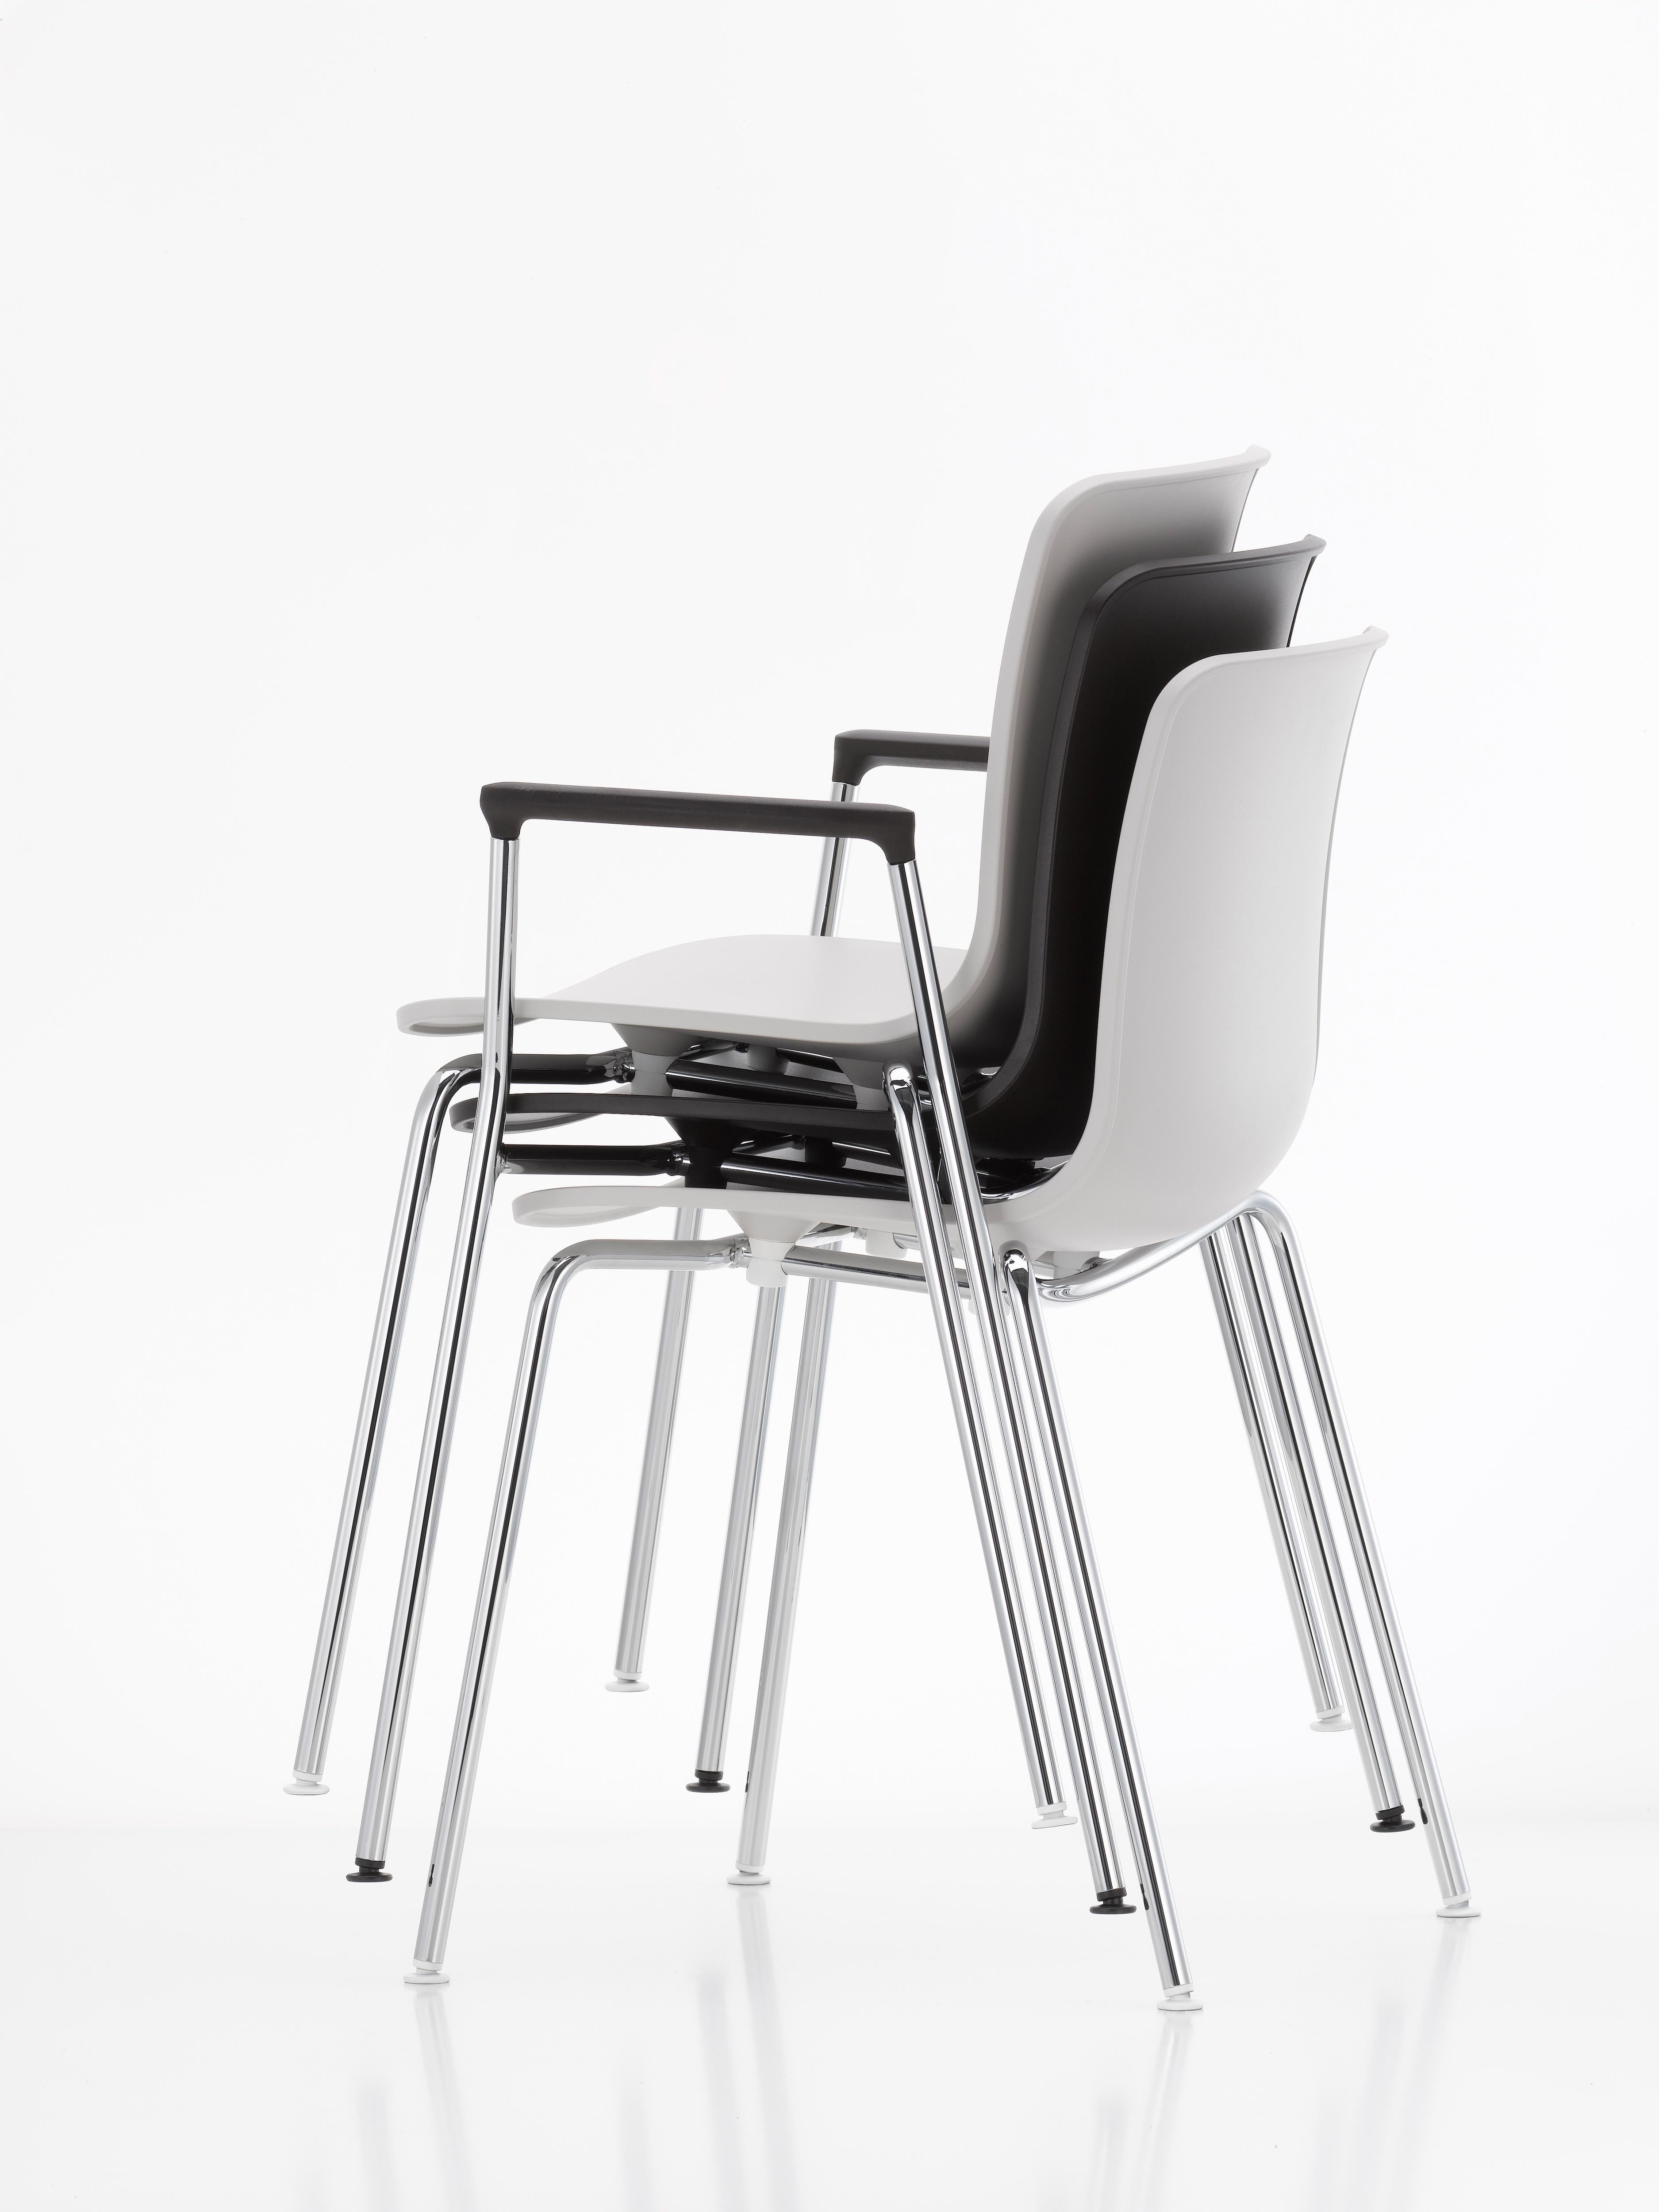 These products are only available in the United States.

The HAL Stool High is a classic bar stool with a four-legged base at a standard height

Materials:
Seat shell: Dyed-through polypropylene
Base: Chrome-plated tubular steel with antiskid